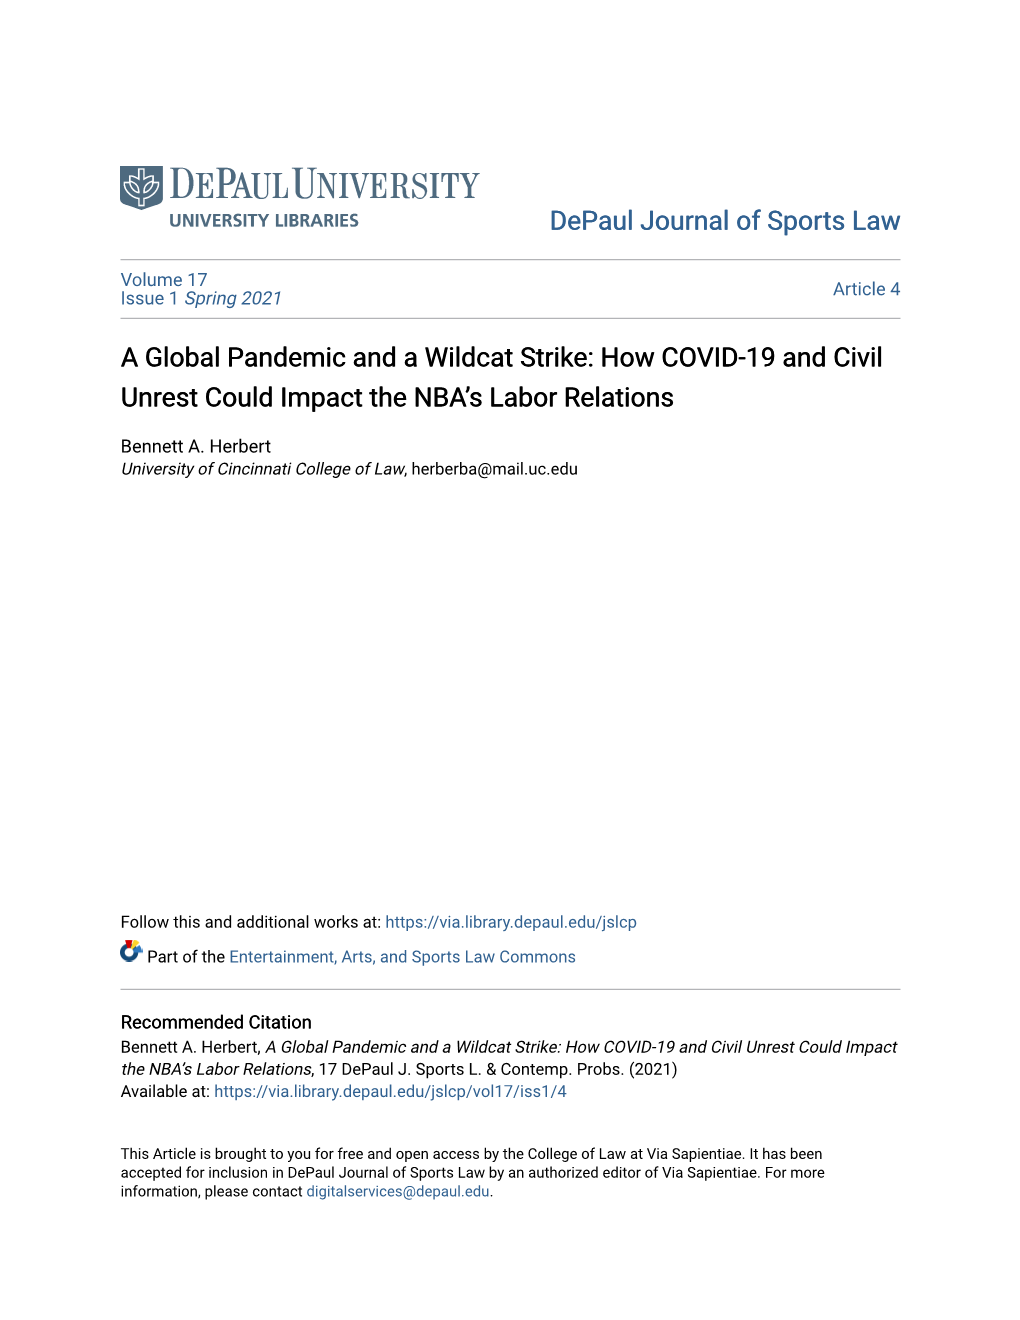 A Global Pandemic and a Wildcat Strike: How COVID-19 and Civil Unrest Could Impact the NBA’S Labor Relations